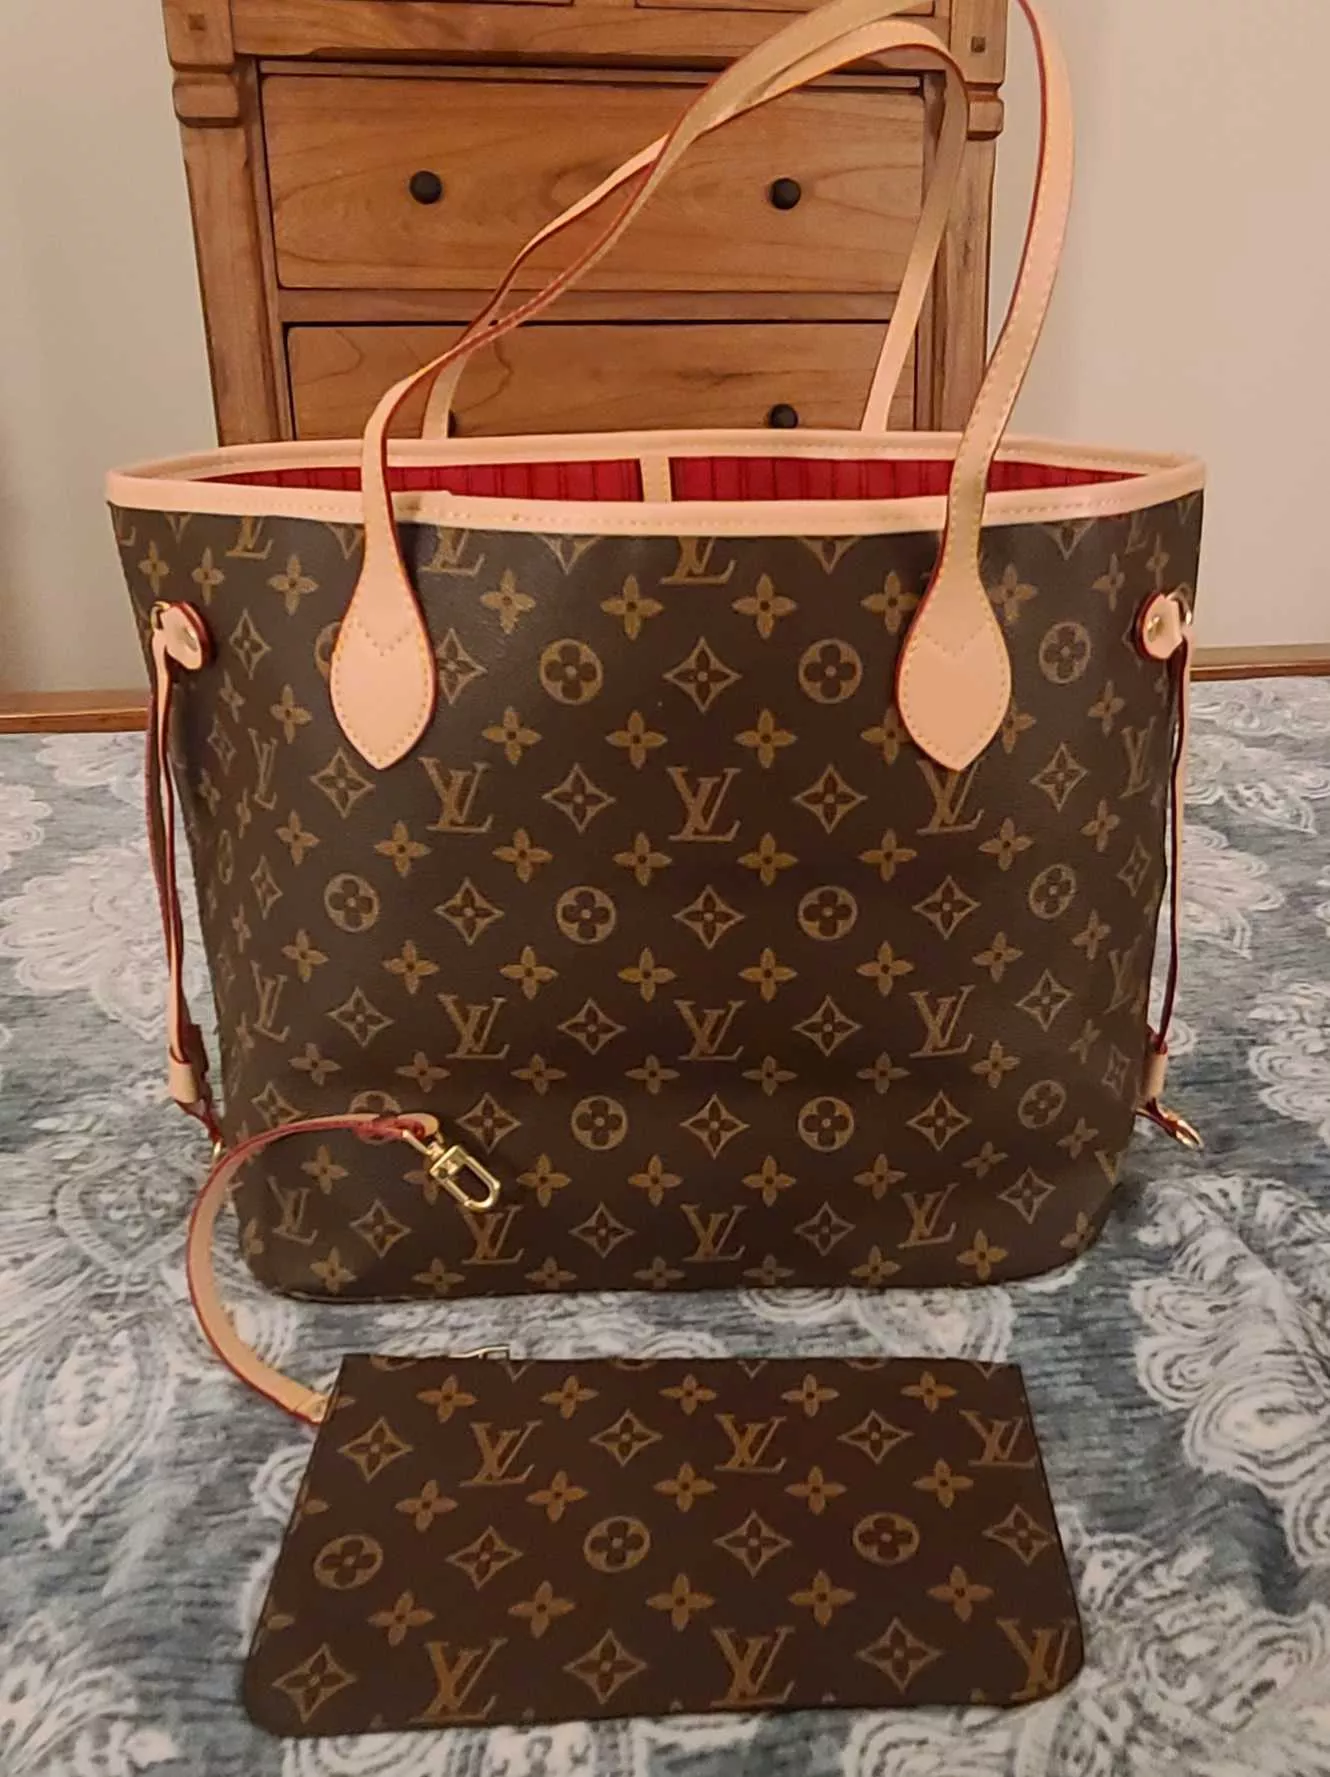 Dhgate Neverfull with Links! 